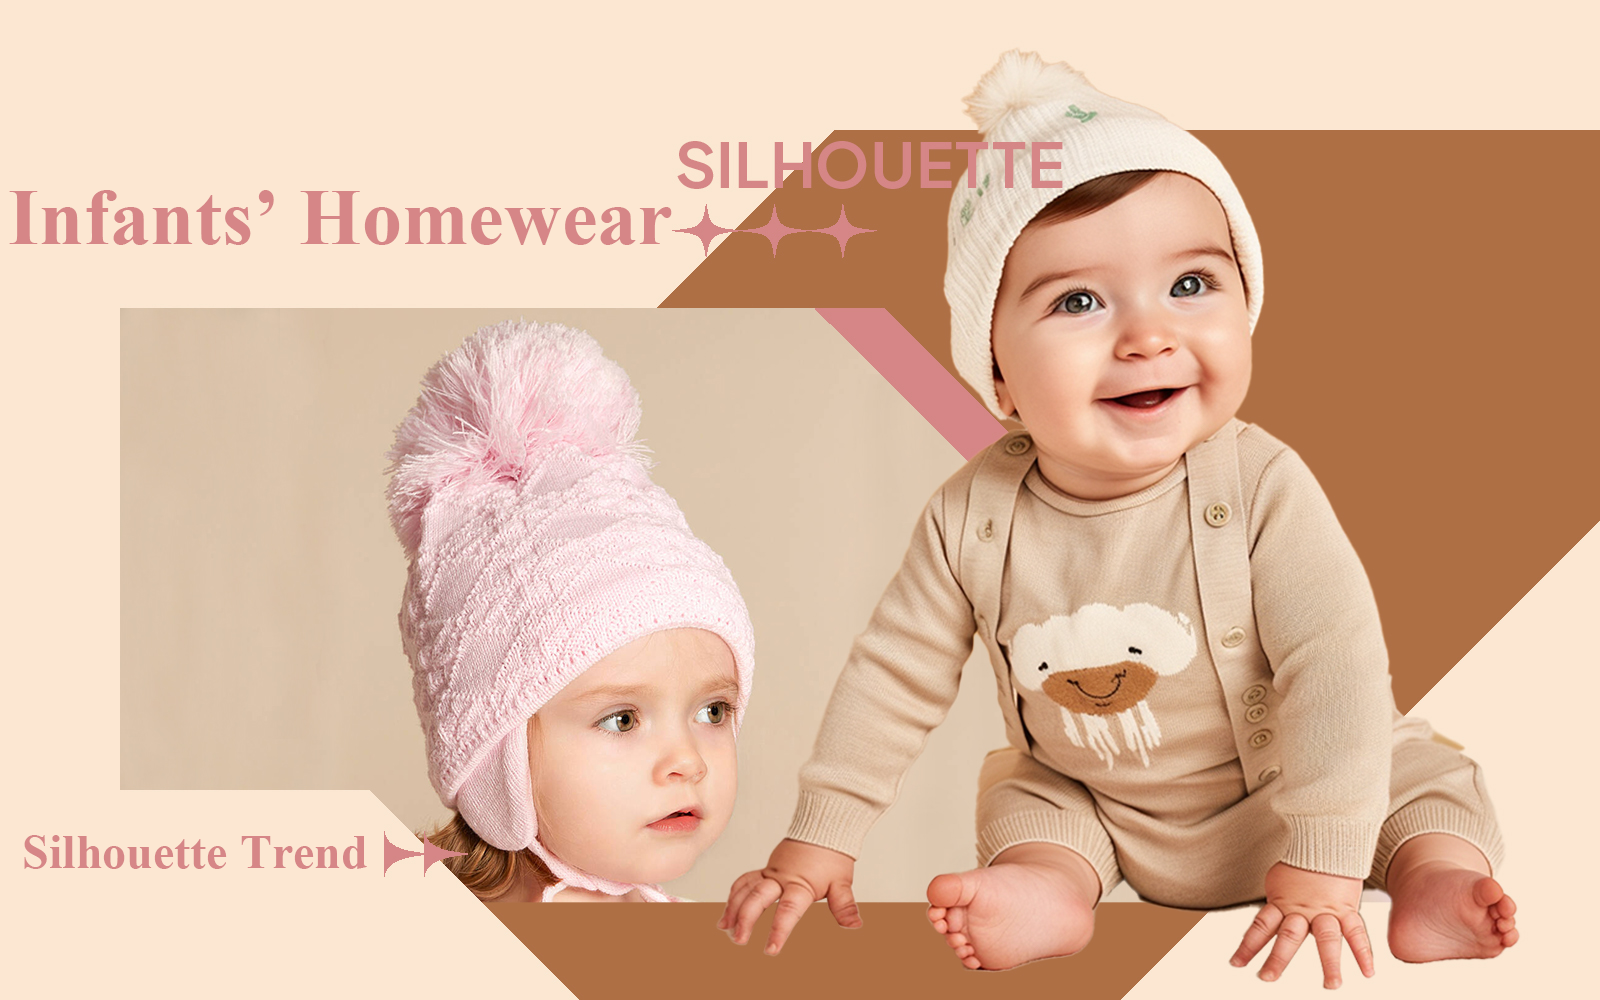 The Silhouette Trend for Infants' Homewear